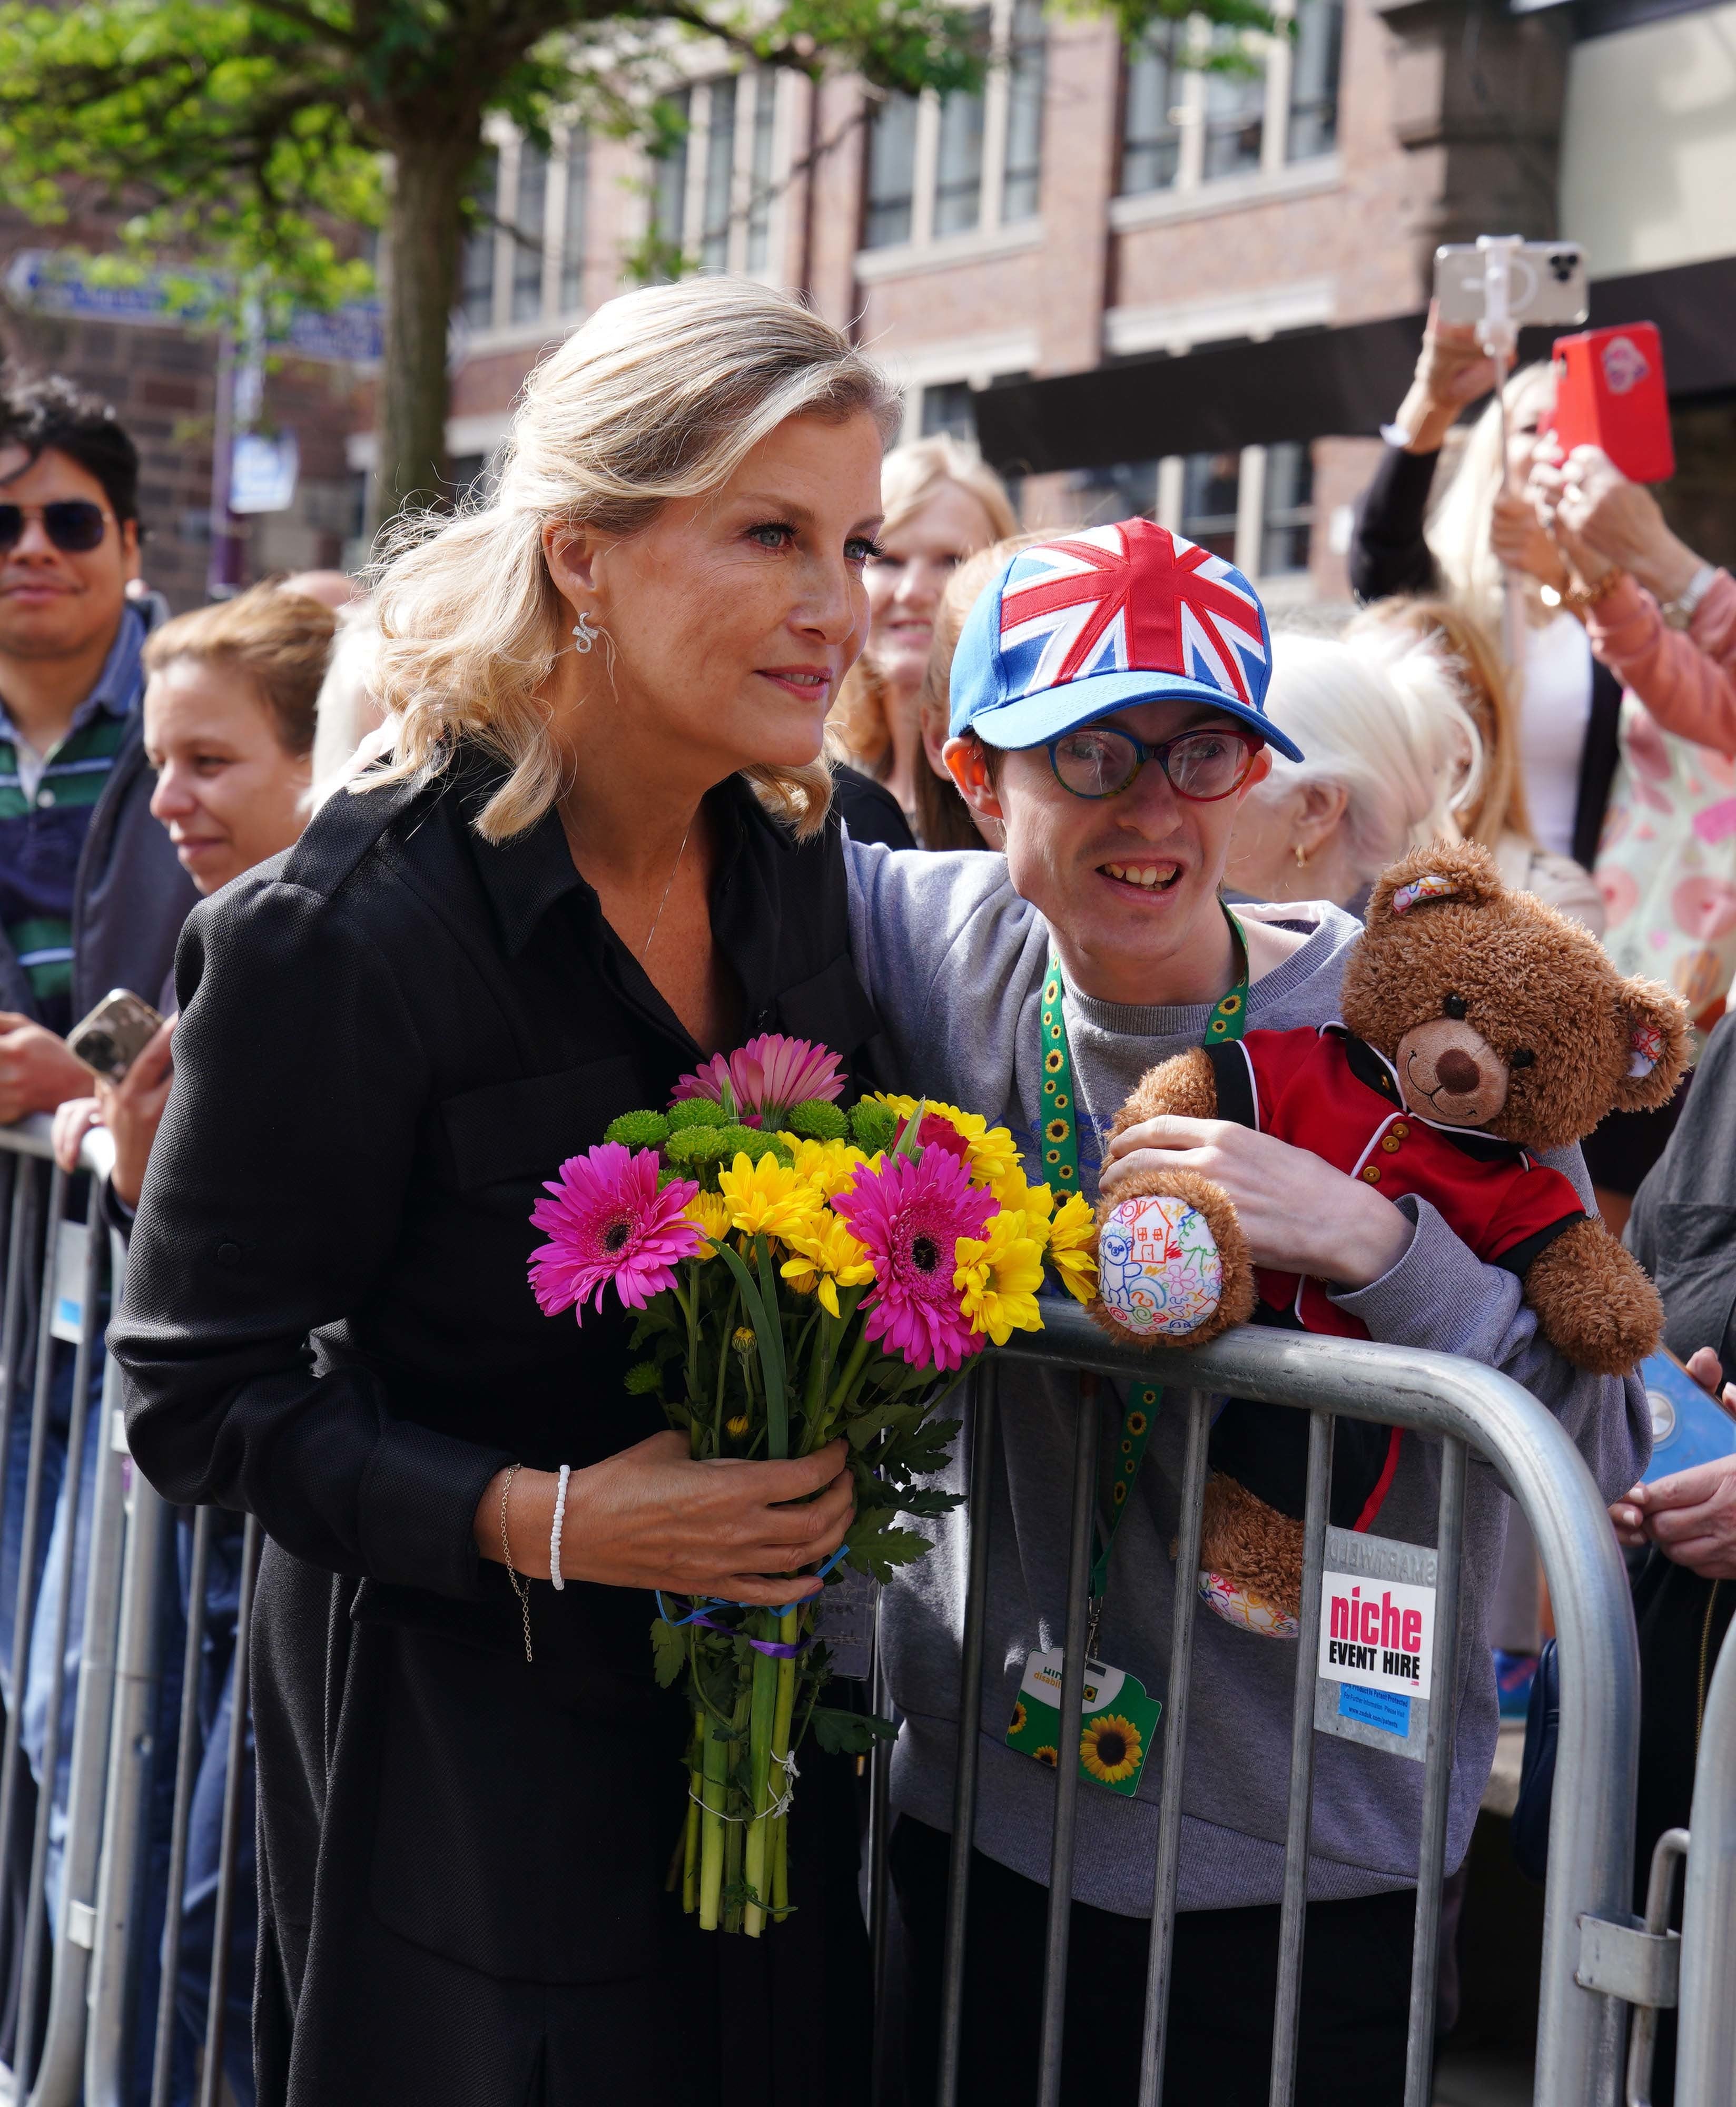 The Countess of Wessex meets members of the public as she views floral tributes in St Ann’s Square, Manchester (Peter Byrne/PA)